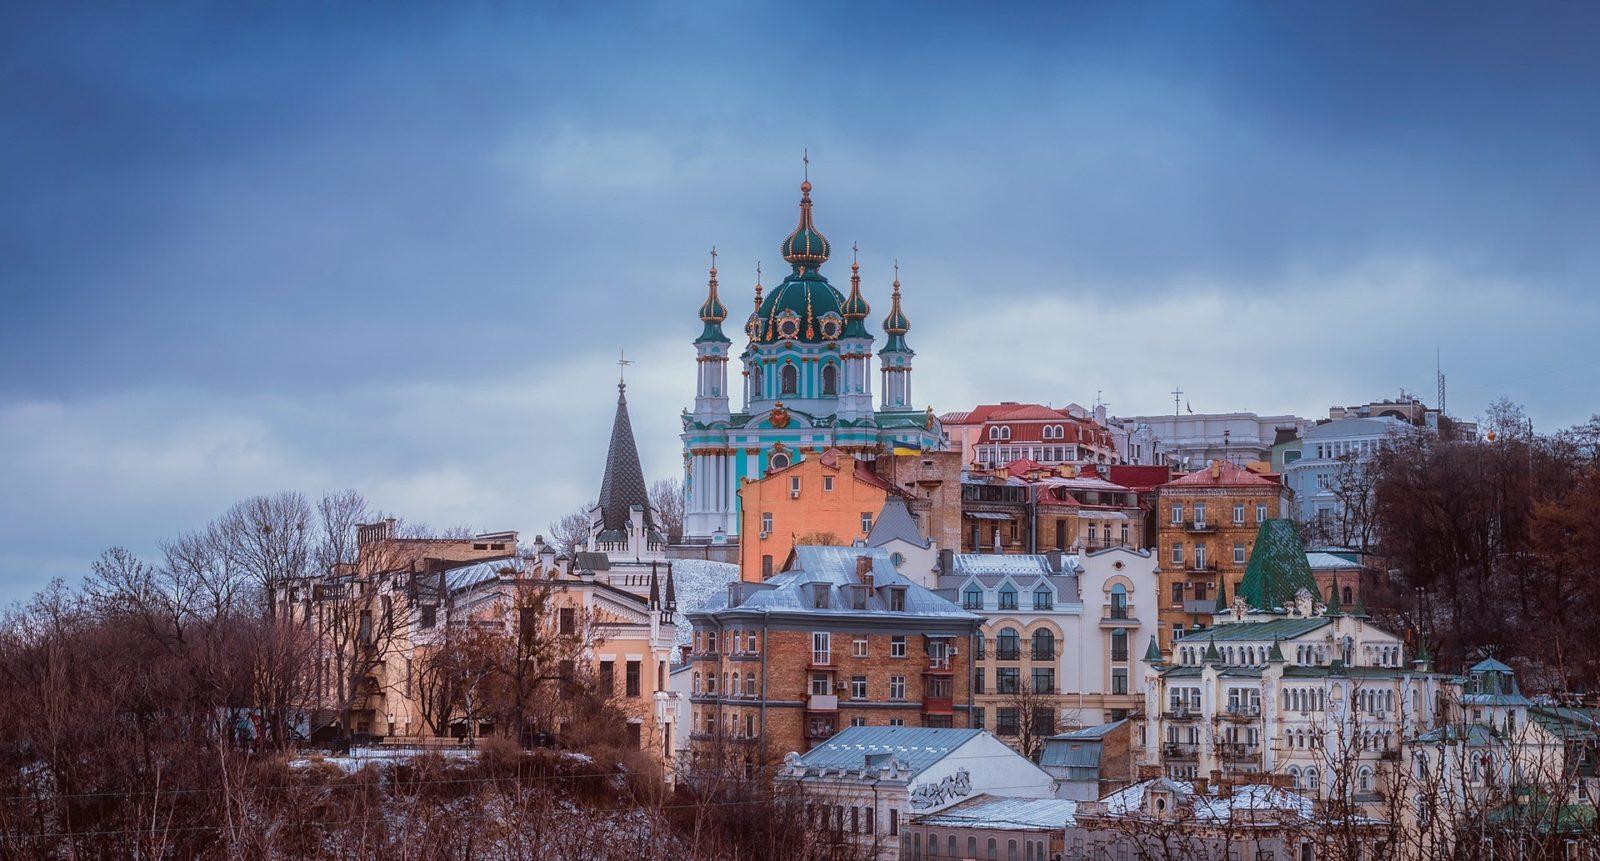 Kyiv is included in TOP 10 world's best city views 1